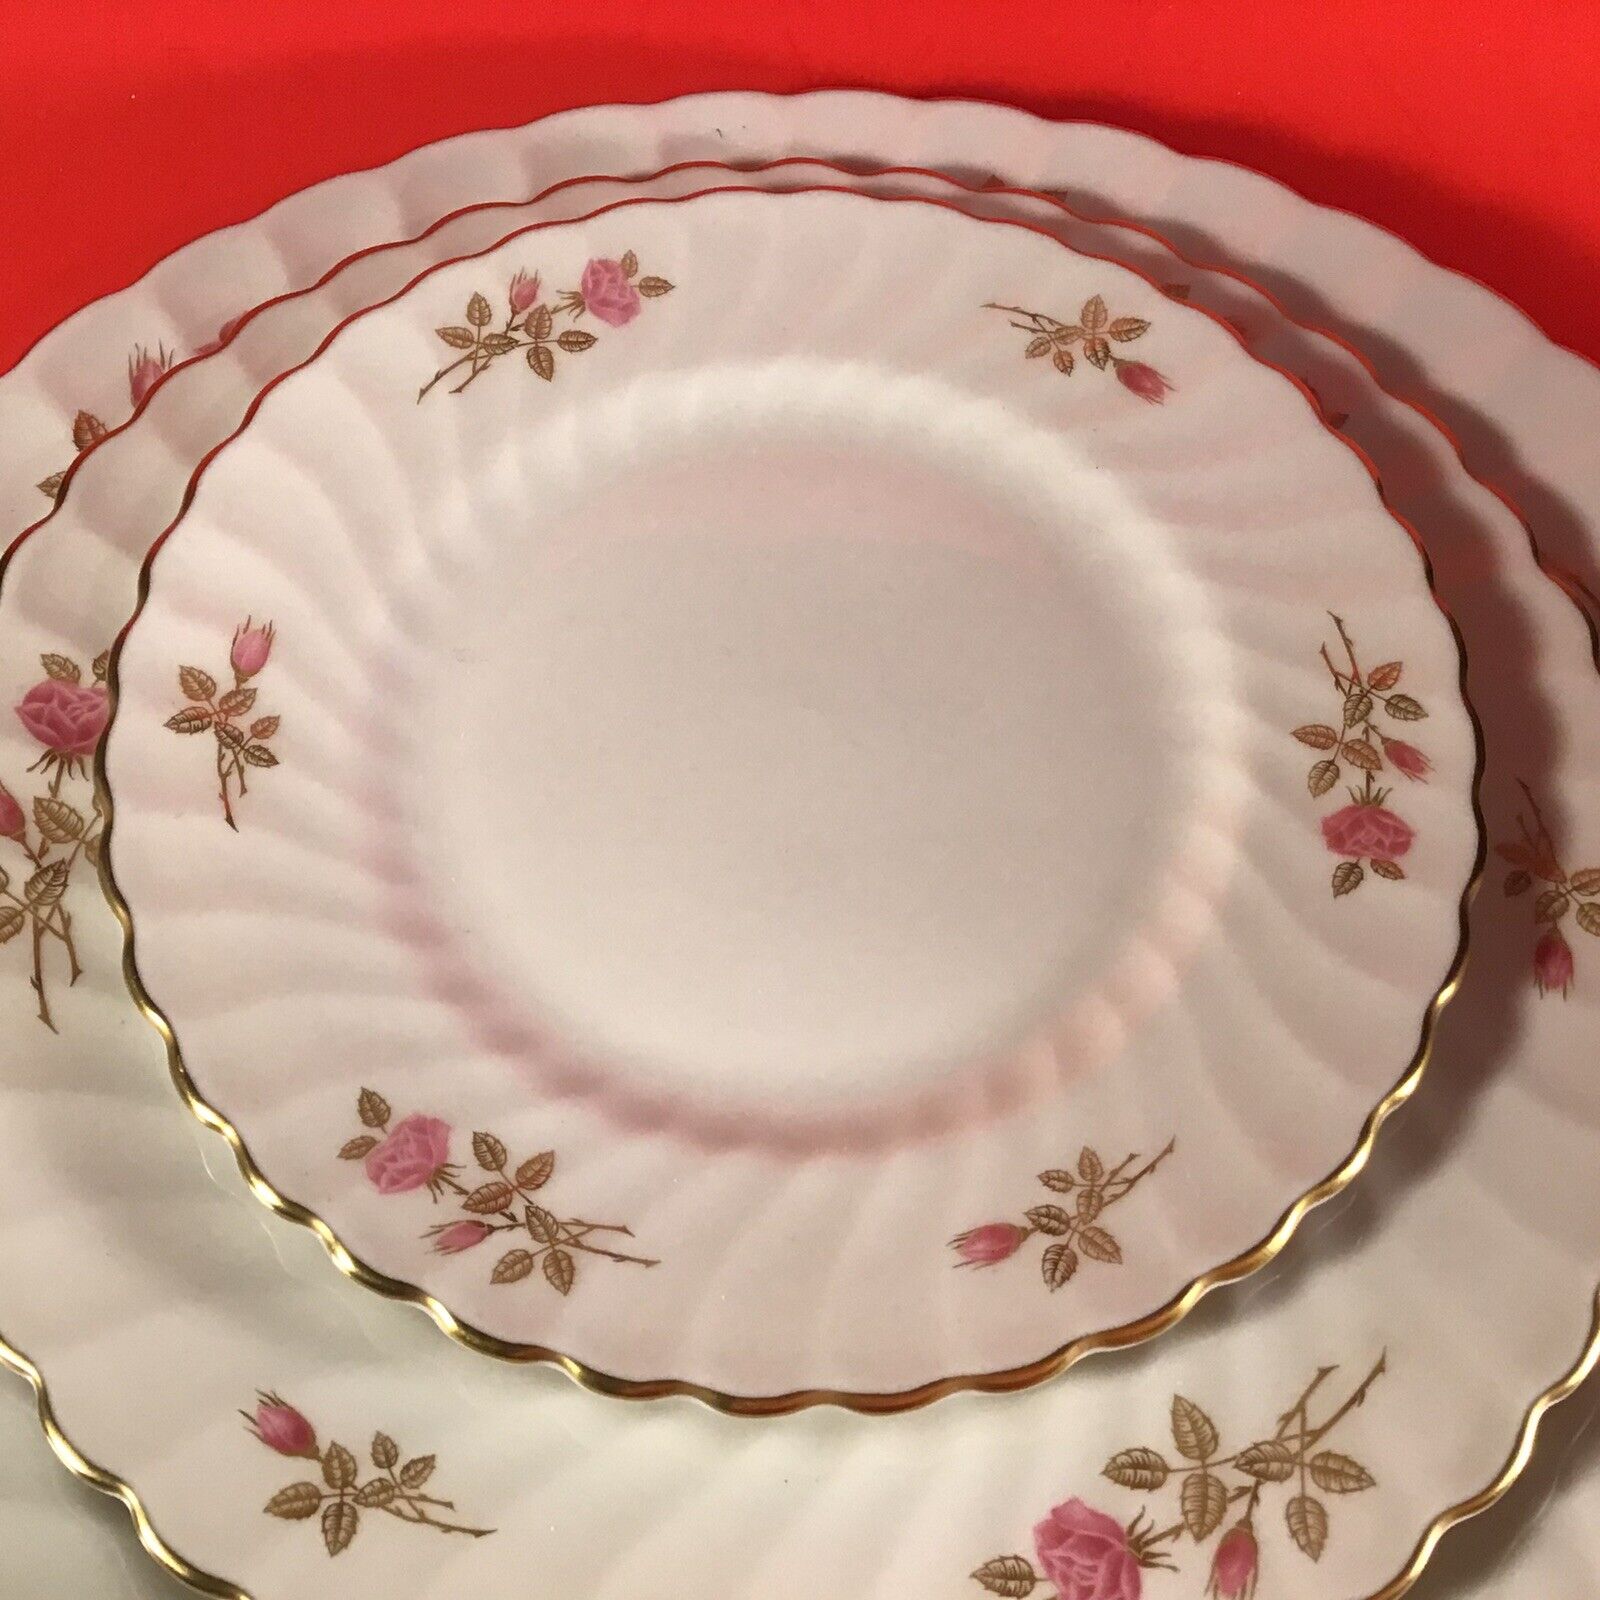 SYRACUSE CHINA COURTSHIP SILHOUETTE 5 PIECE PLACE SETTING PINK AND GOLD FLORAL syracuse china - фотография #5